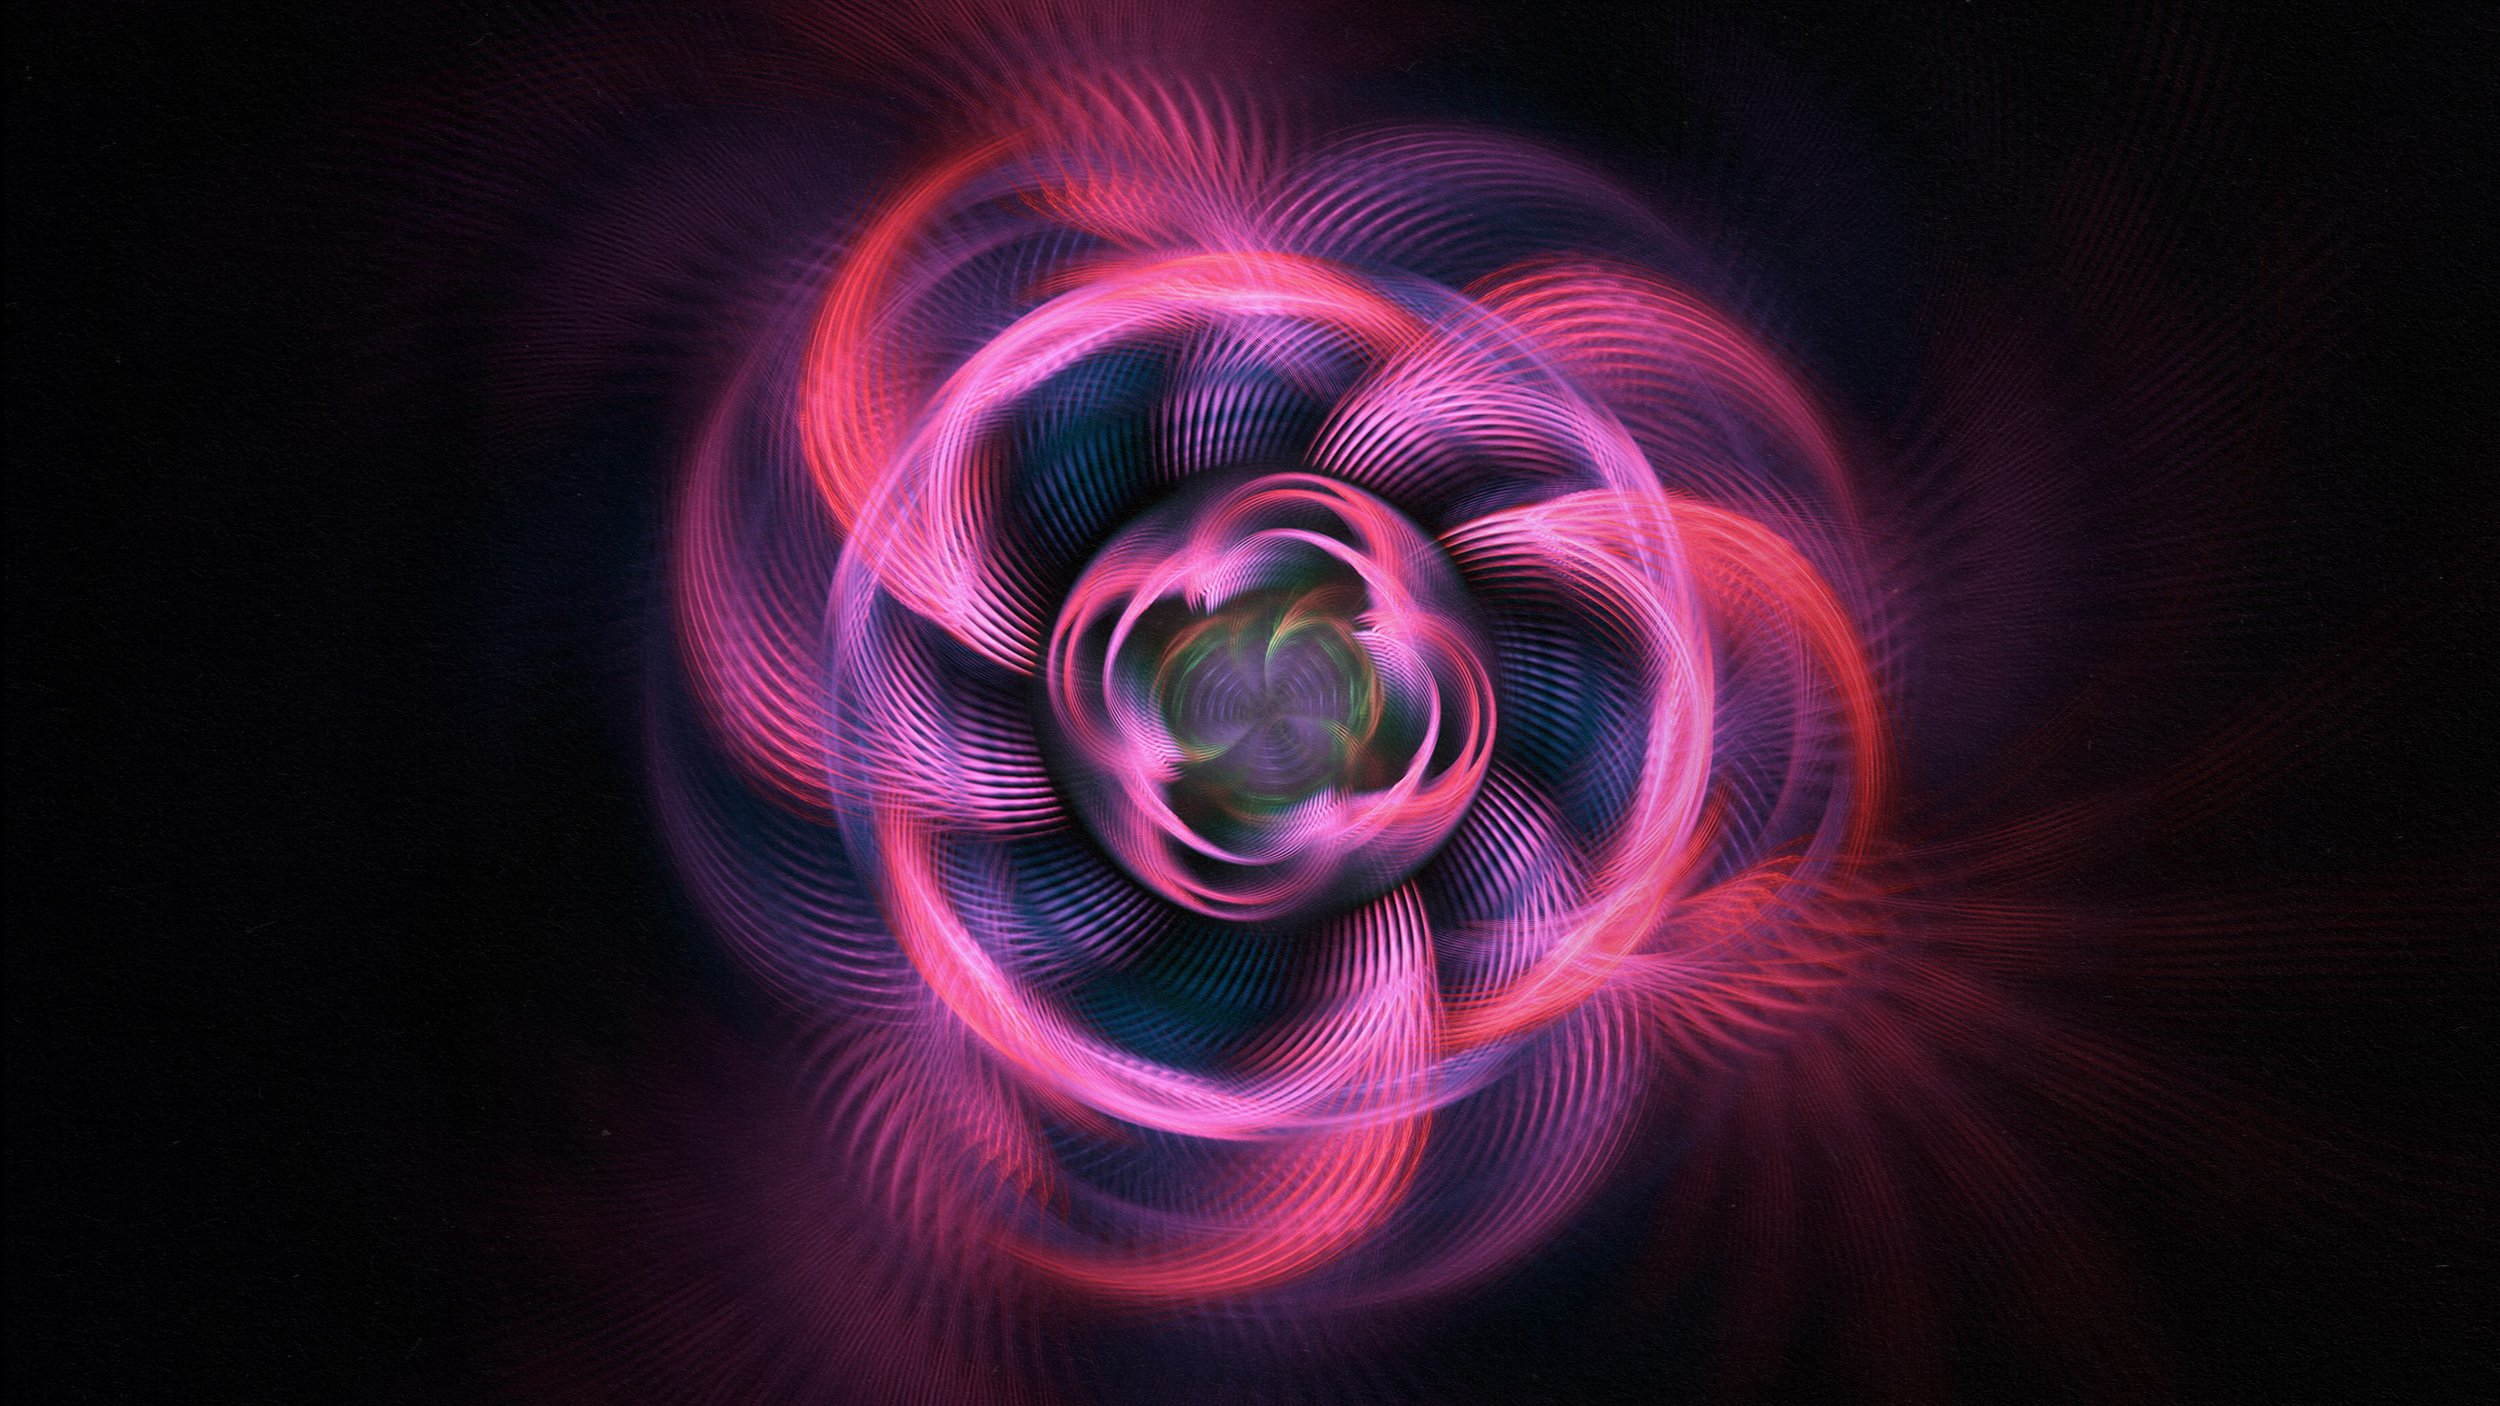 An image of a pink spiral on a black background depicting uncertainty.